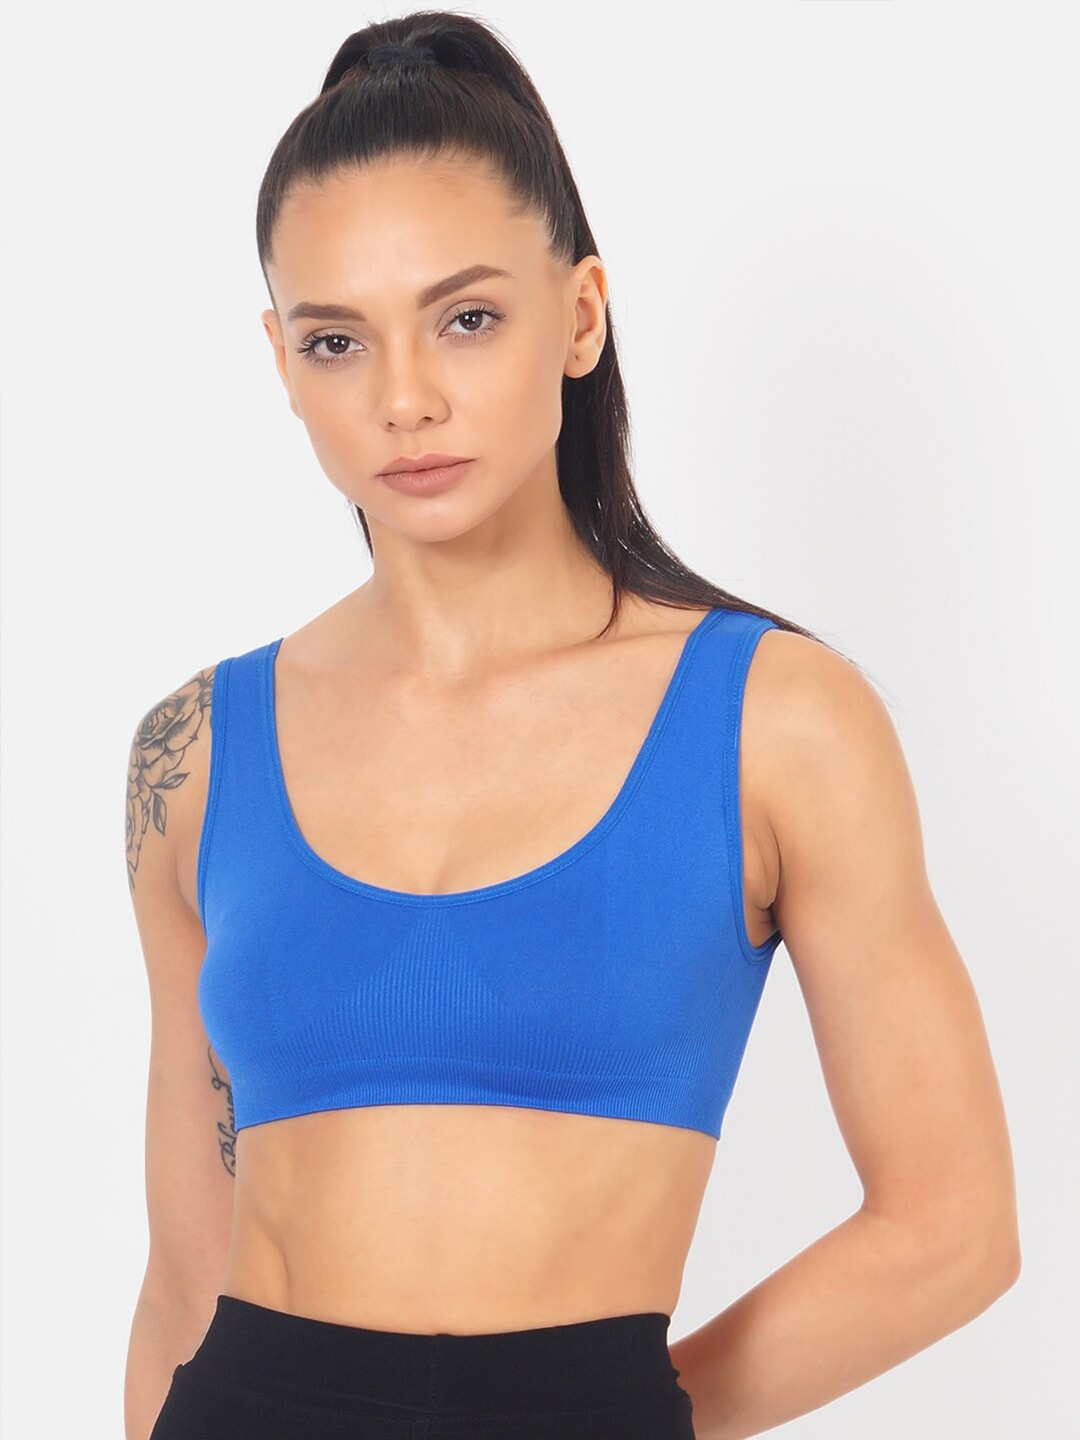 Buy XOXO Design Blue Solid Dry Fit Technology Workout Bra - Non-Padded Non-Wired